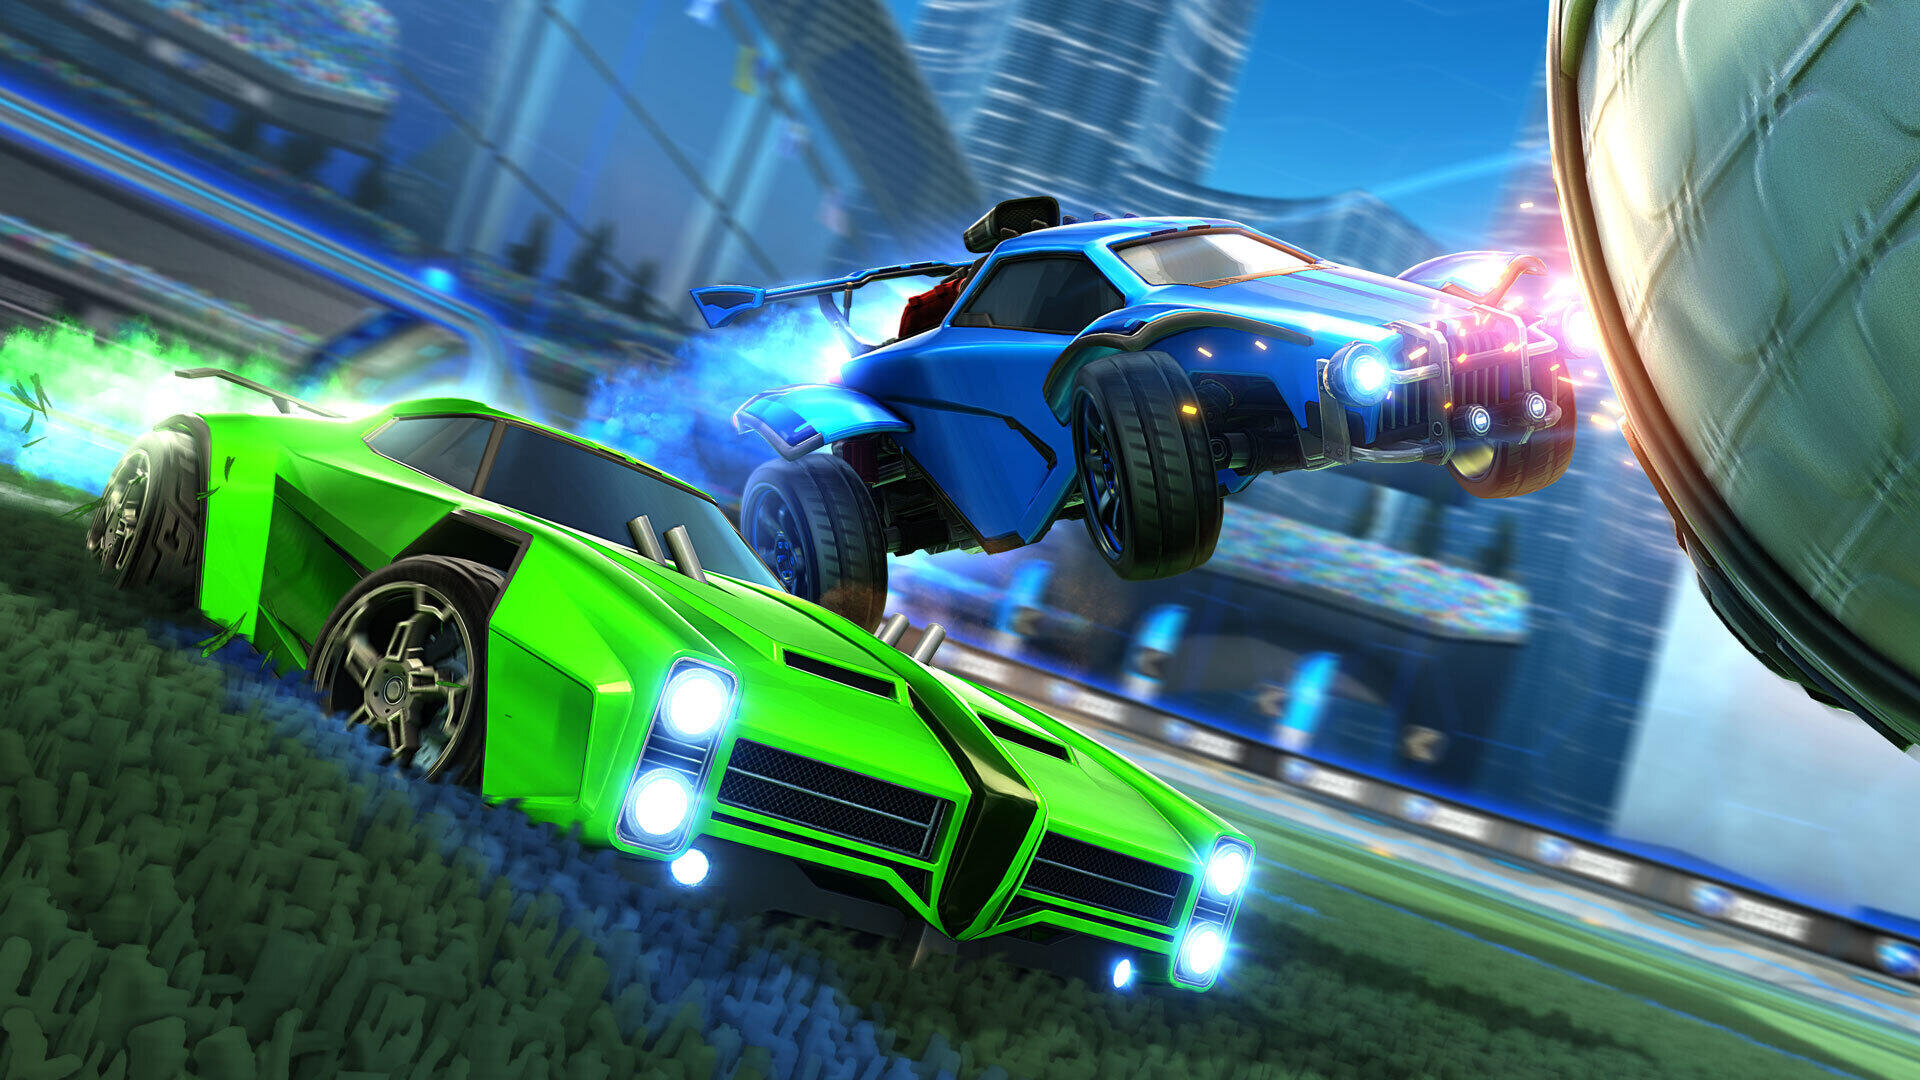 Today we will explain how to use this is Rocket League quick chat. You'll also learn How to turn off and customize quick chat in Rocket League.